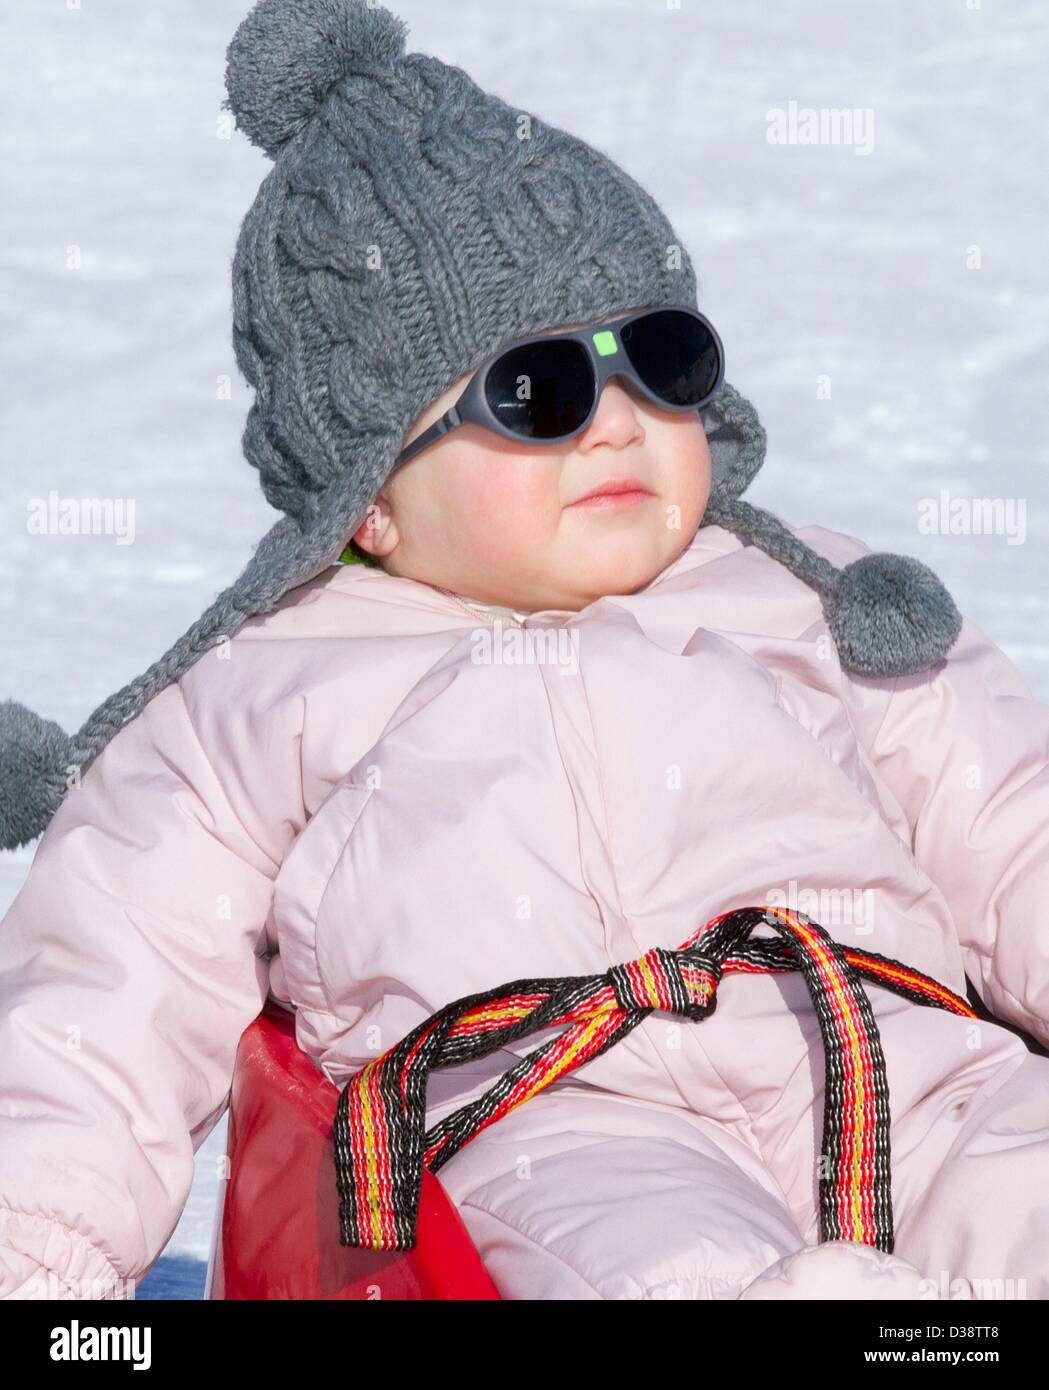 Princess Athena of Denmark poses for the media at Col-de-Bretaye in Villars, 13 February 2013. The family is on a winter holiday in Switzerland. Photo: Albert Nieboer /RPE/NETHERLANDS OUT Stock Photo